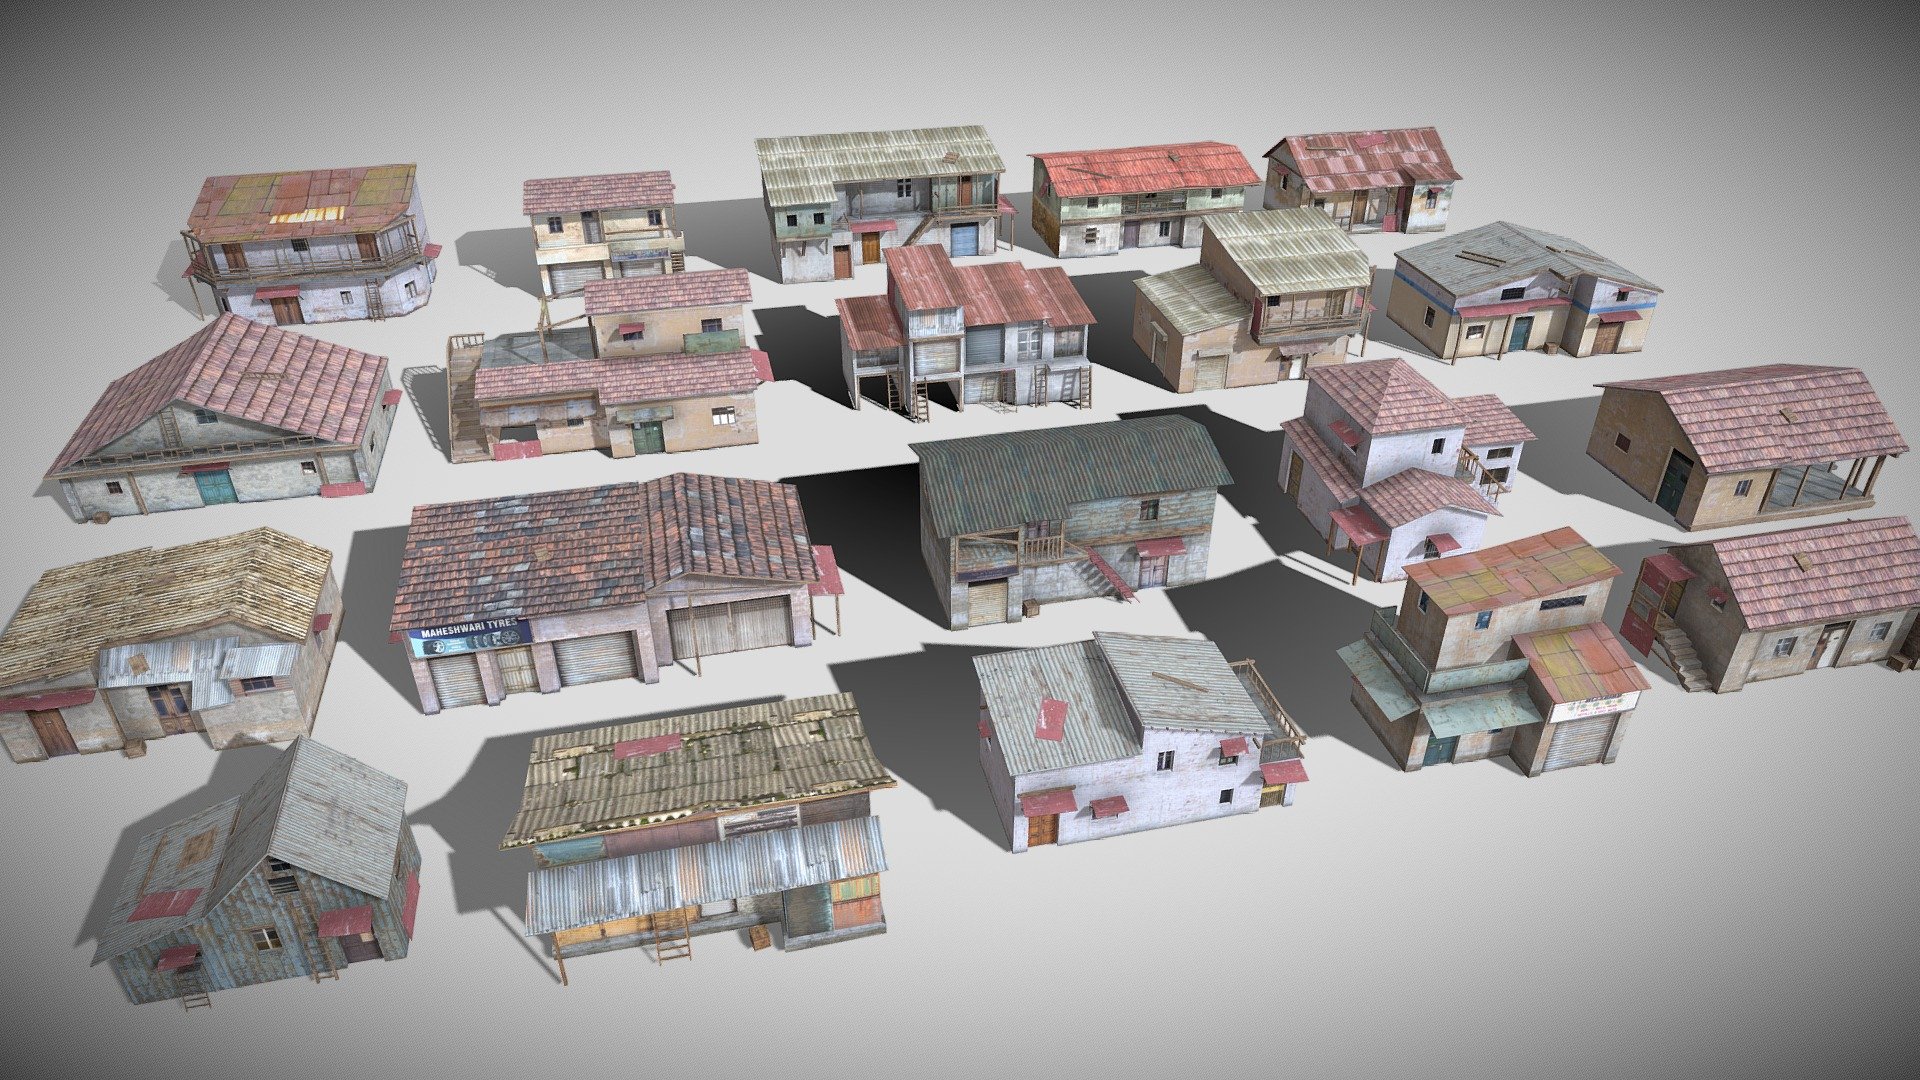 Game Ready 3D Old House /slum Native file format 3Ds max 2022 Other formats Blender 4.0 ,FBX, OBJ, All formats include materials &amp; textures

Materials &amp; textures. 20 Diffuse Map 2048x2048 - 20 Slum Collection Low poly 3D model - Buy Royalty Free 3D model by 3DRK (@3DRK98) 3d model